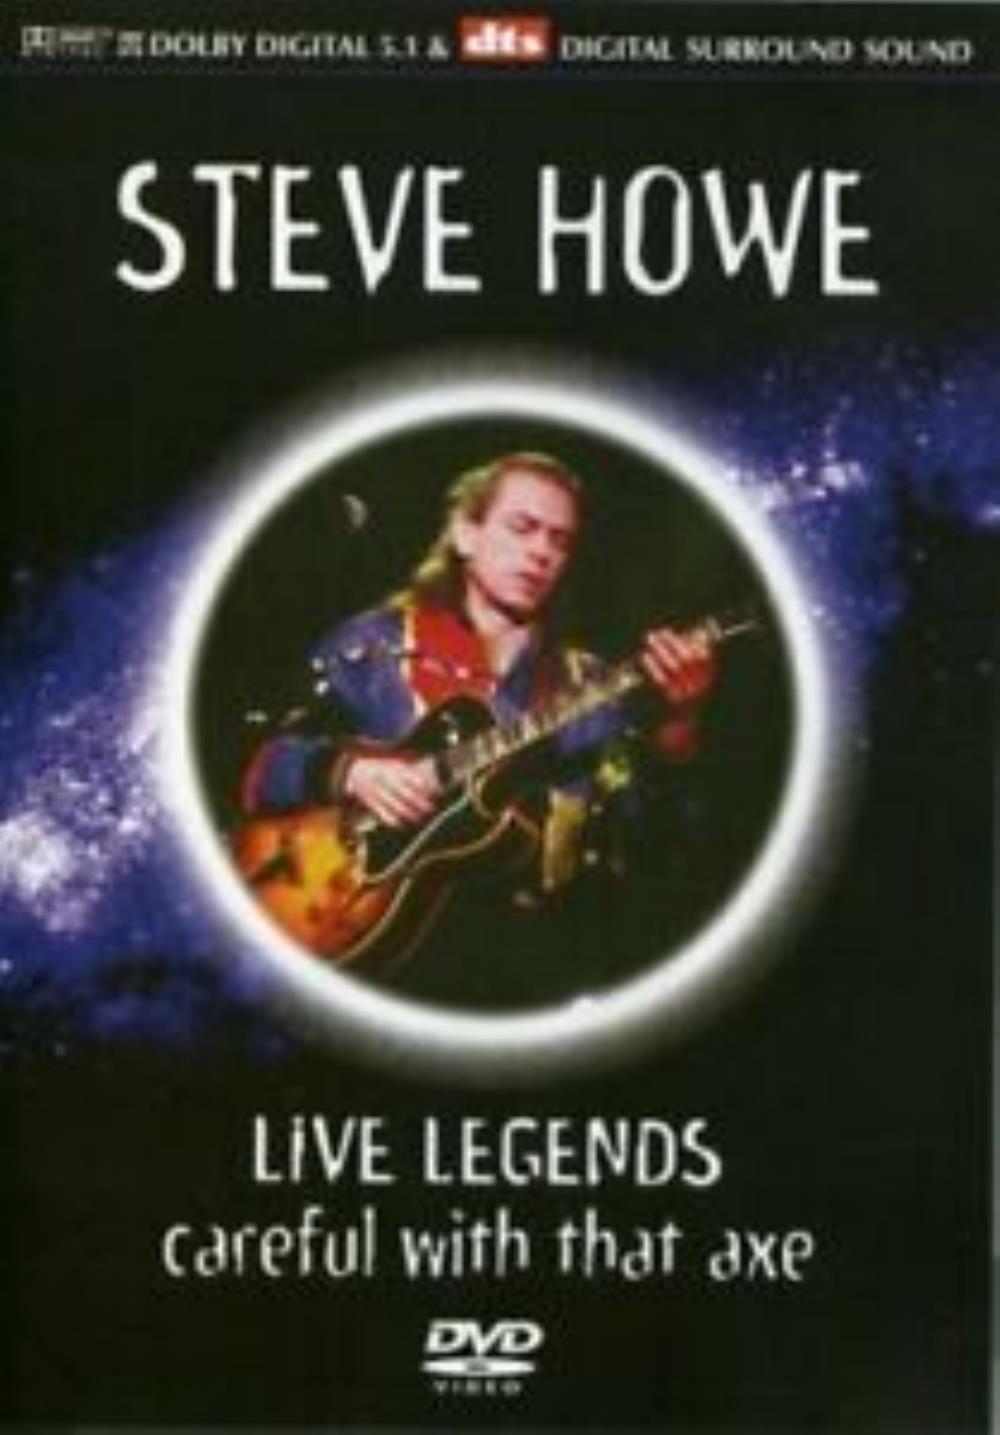 Steve Howe Live Legends - Careful With That Axe album cover